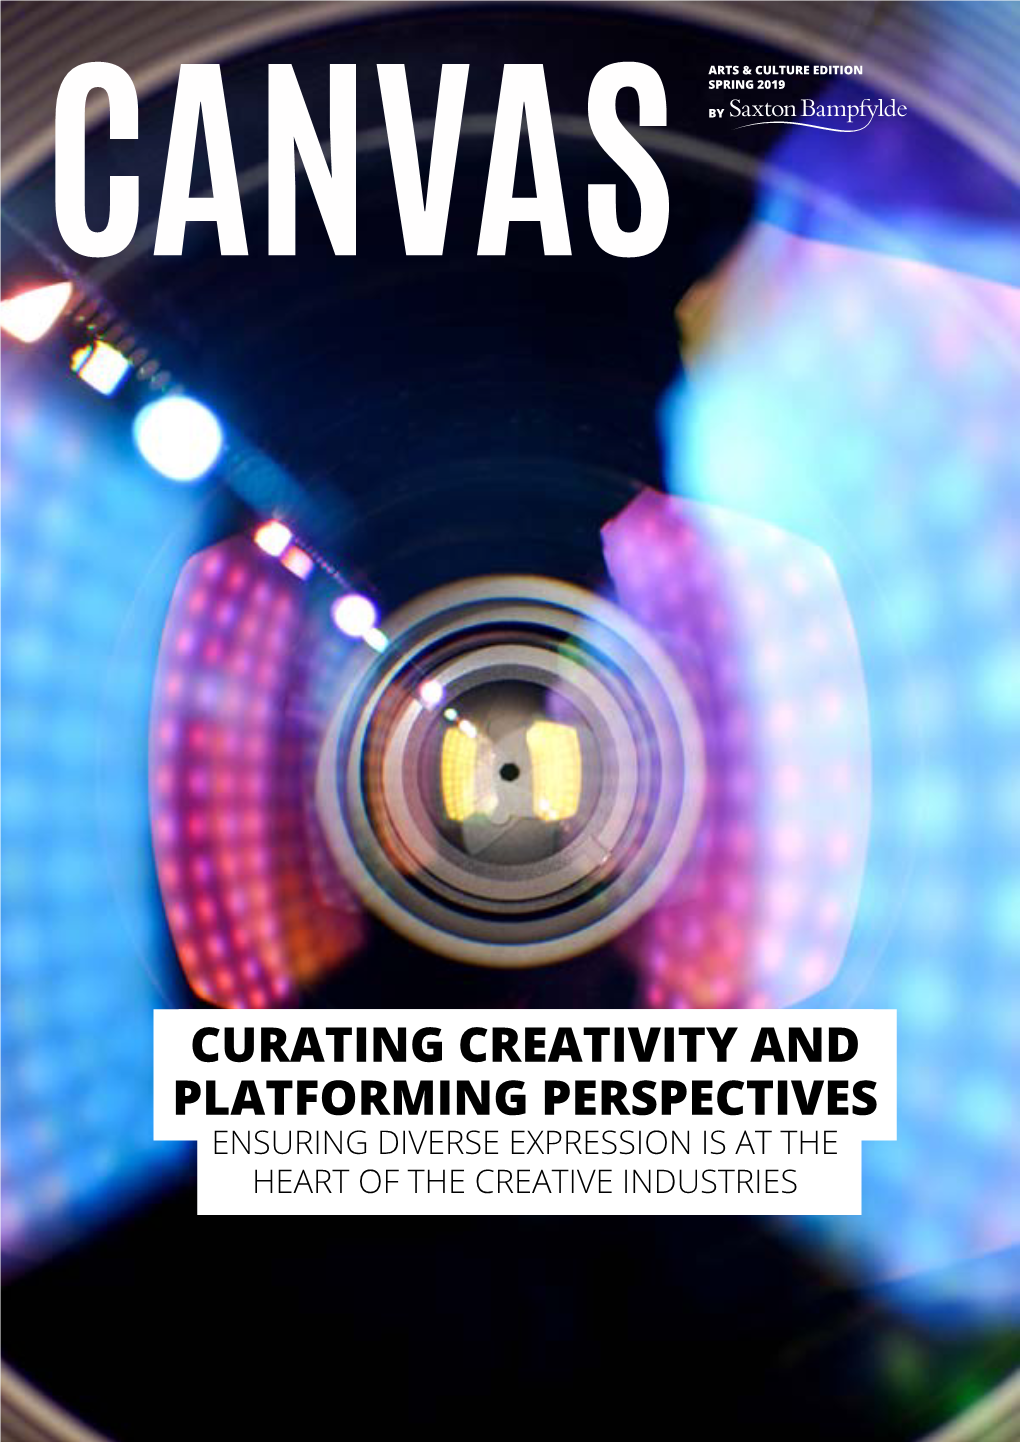 Curating Creativity and Platforming Perspectives